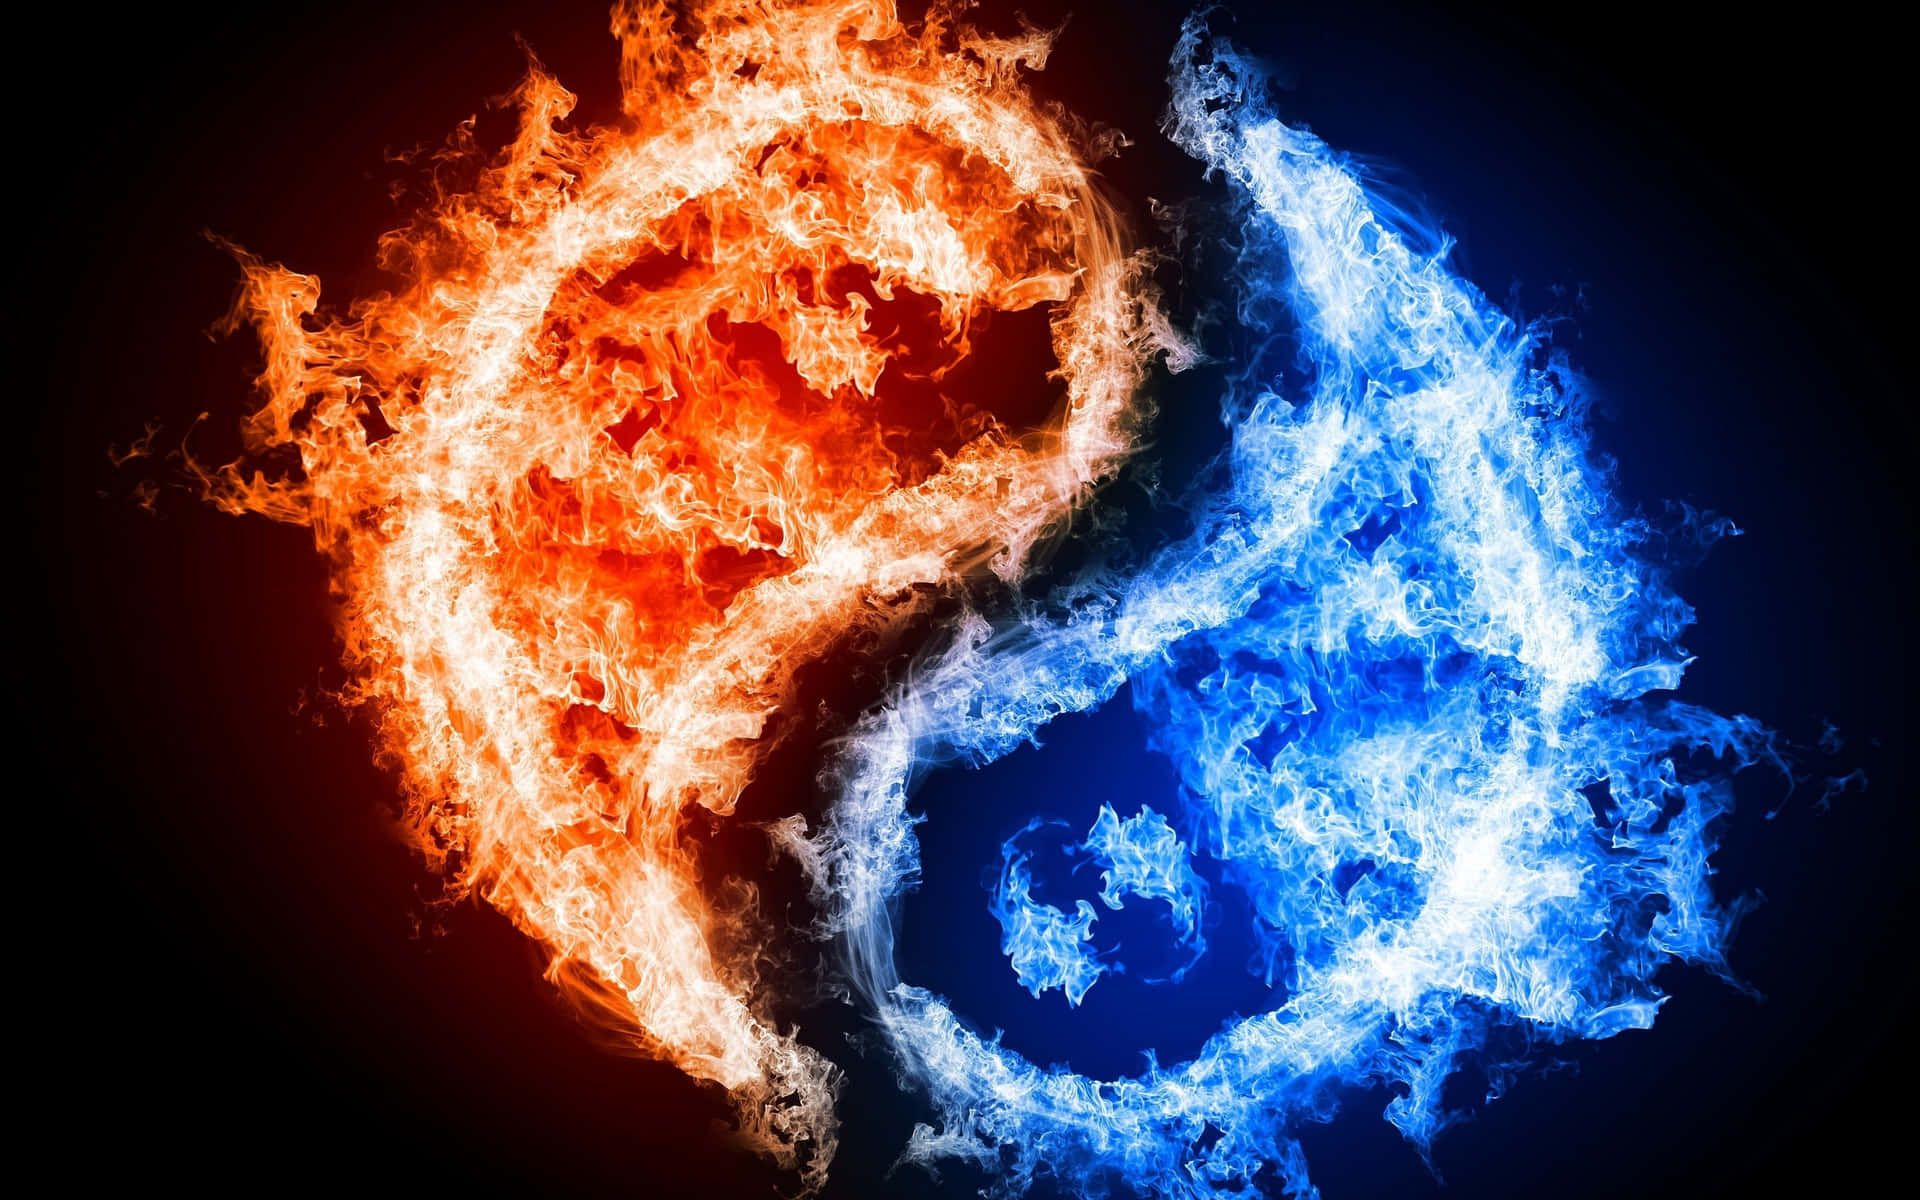 "Powerful Red and Blue Fire" Wallpaper